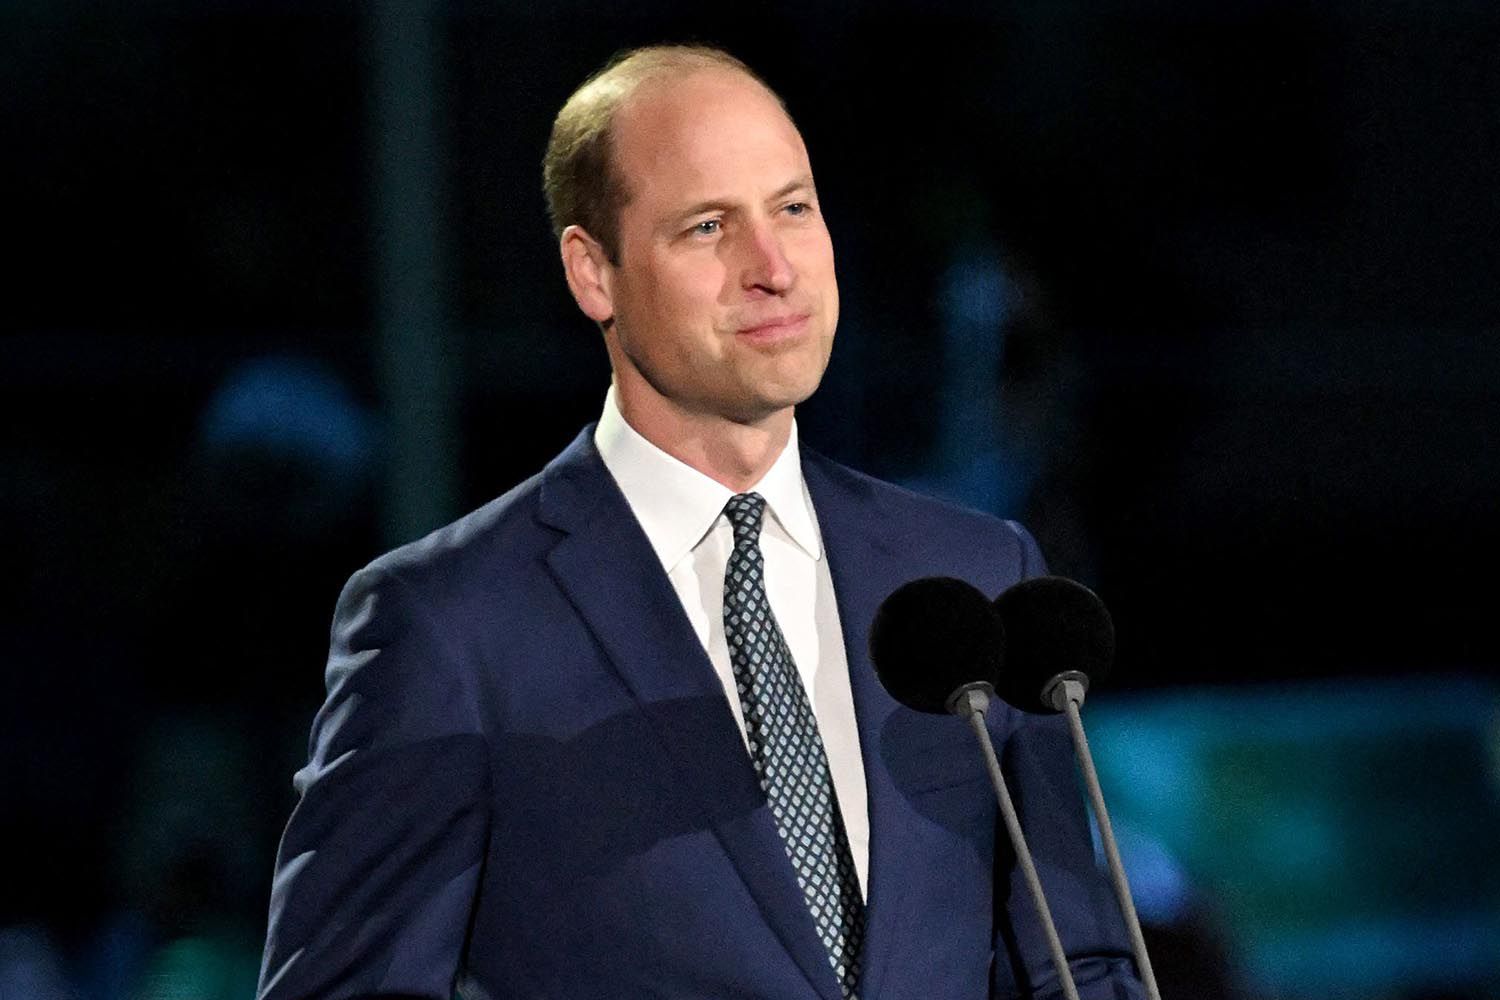 Prince William wearing a blue suit